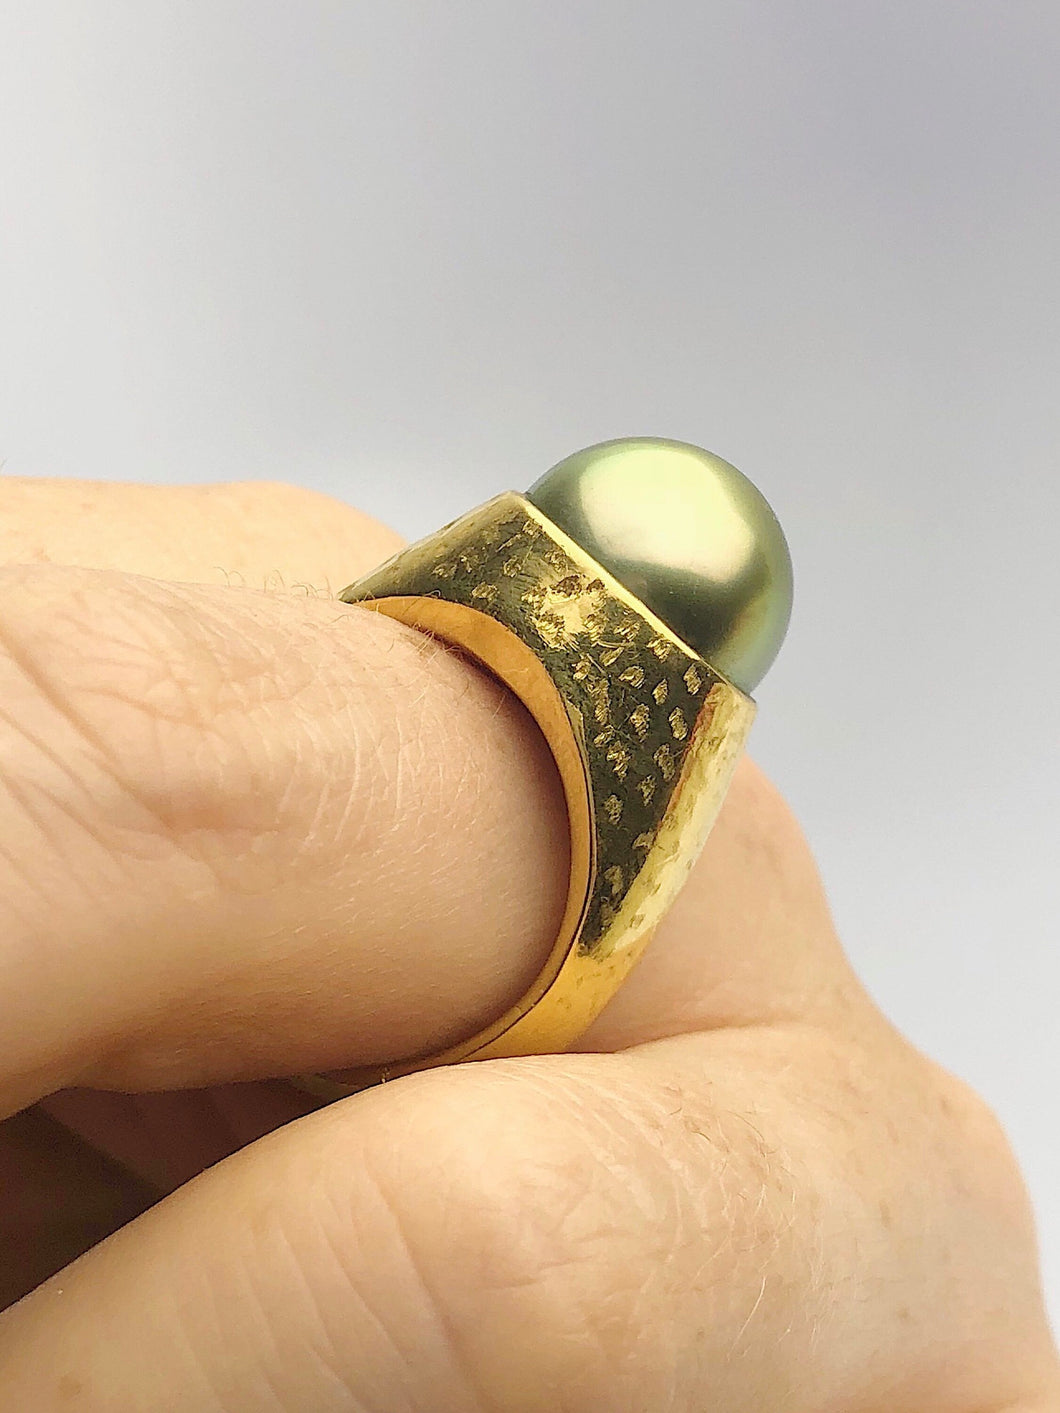 24K Gold - Natural Color - 13.35mm Pistachio Tahitian Pearl - Statement Ring - Size 8.5 - Handmade